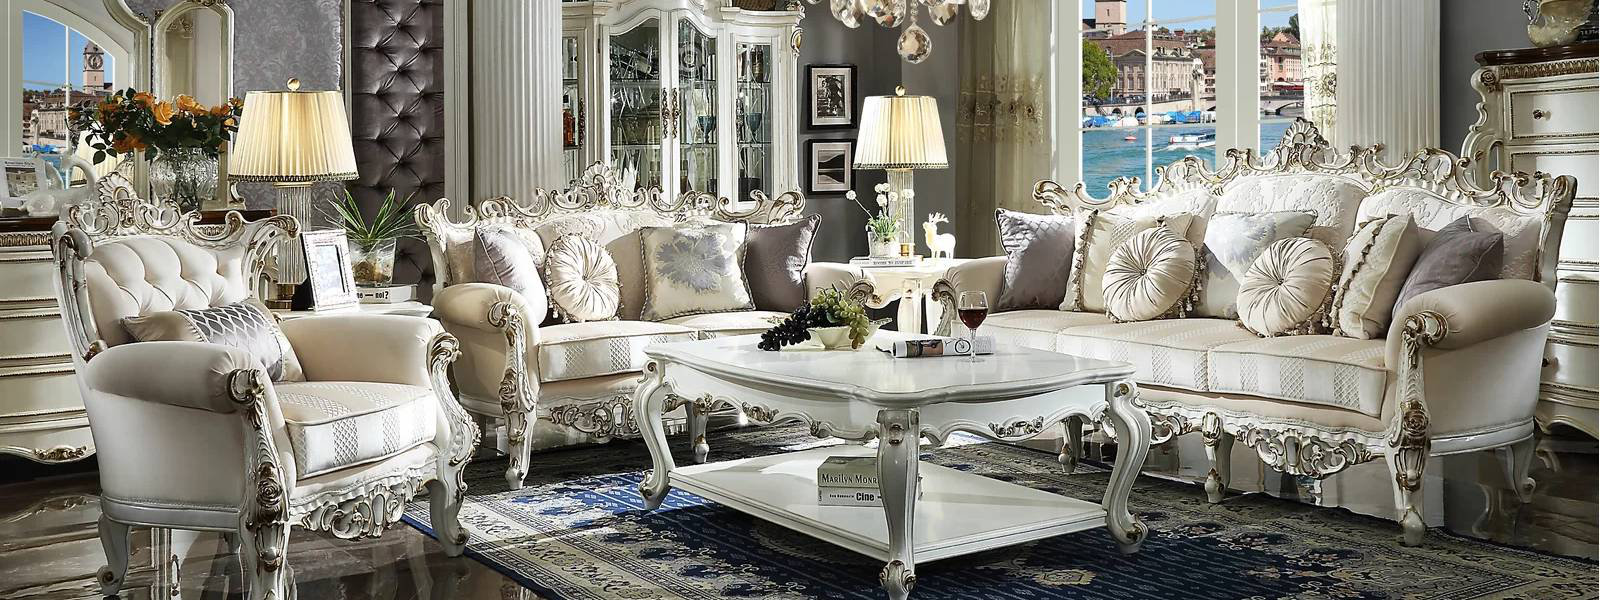 Blue Damask French Chairs with Oval Mirror and Brass Coffee Table - French  - Living Room